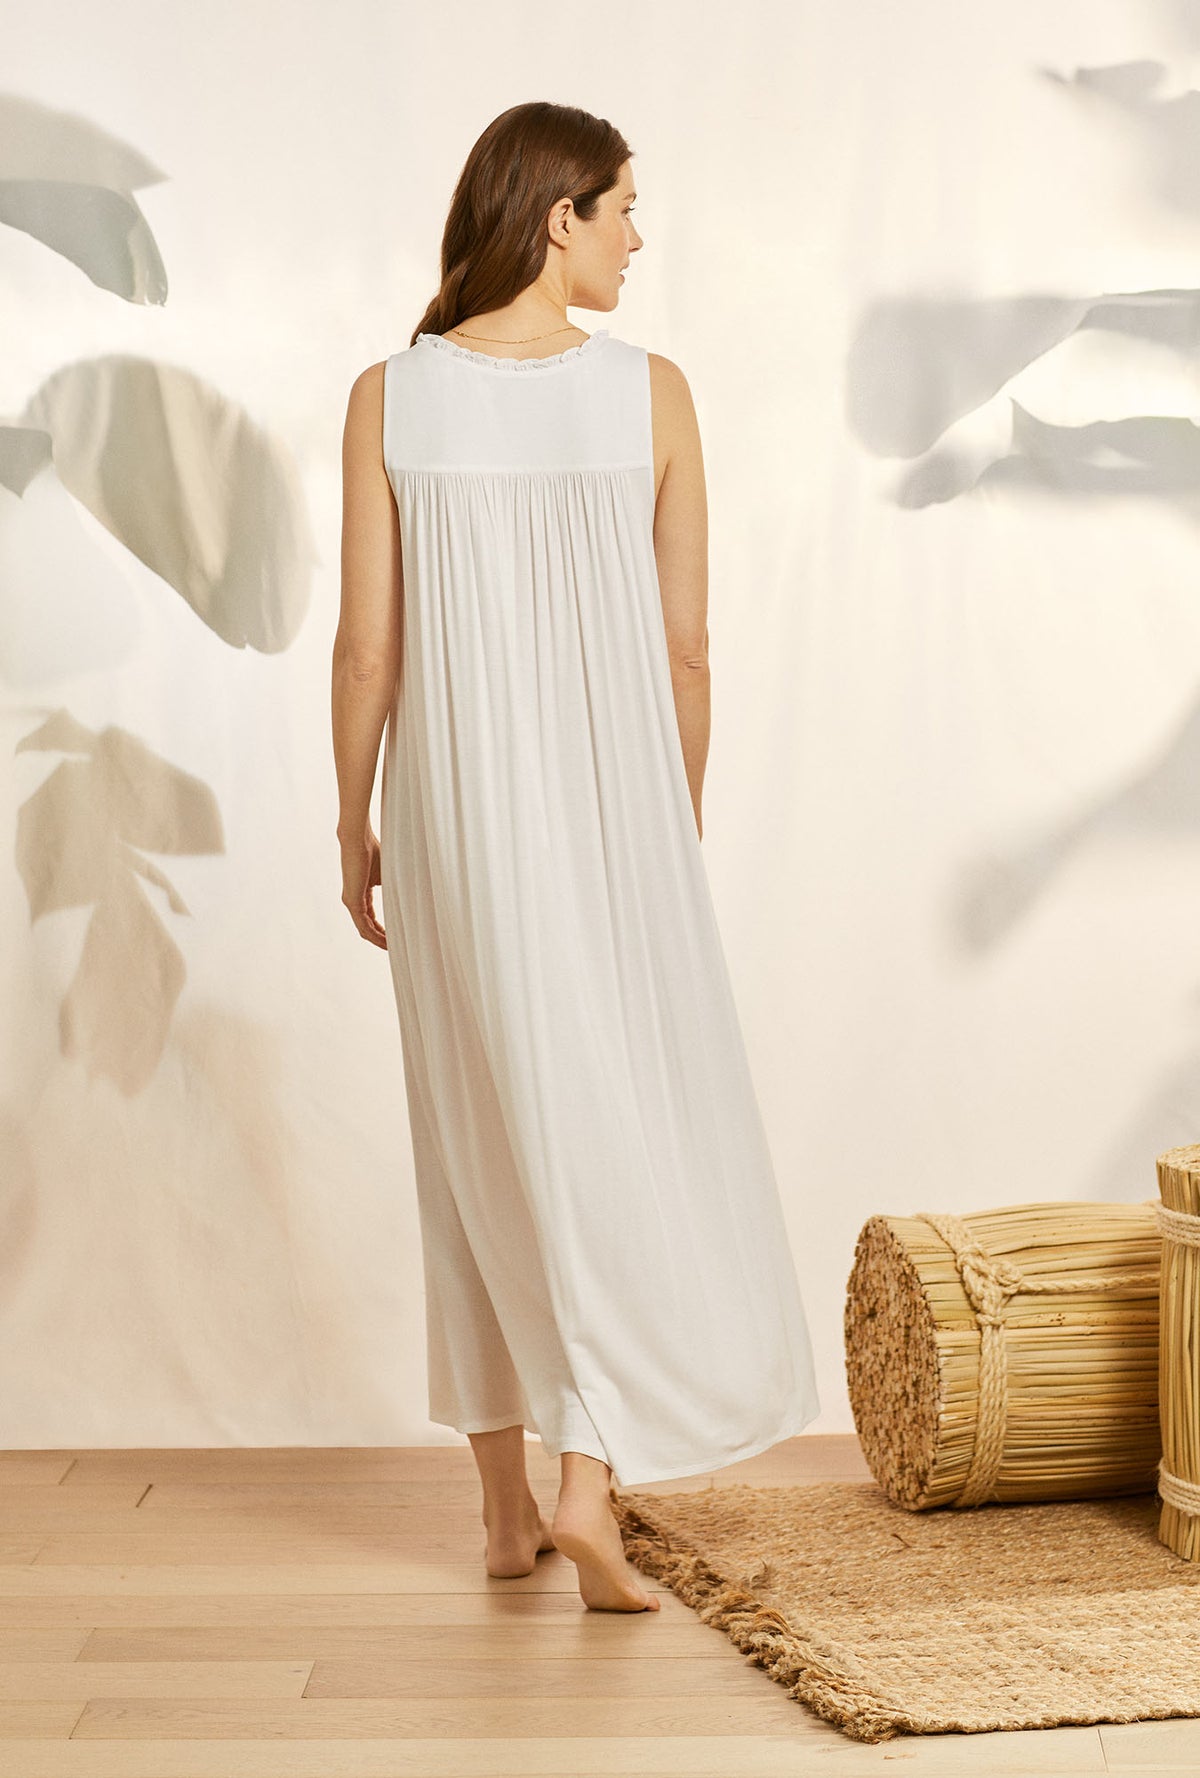 A lady wearing white sleeveless cassic knit eileen nightgown with tencel white dream pattern